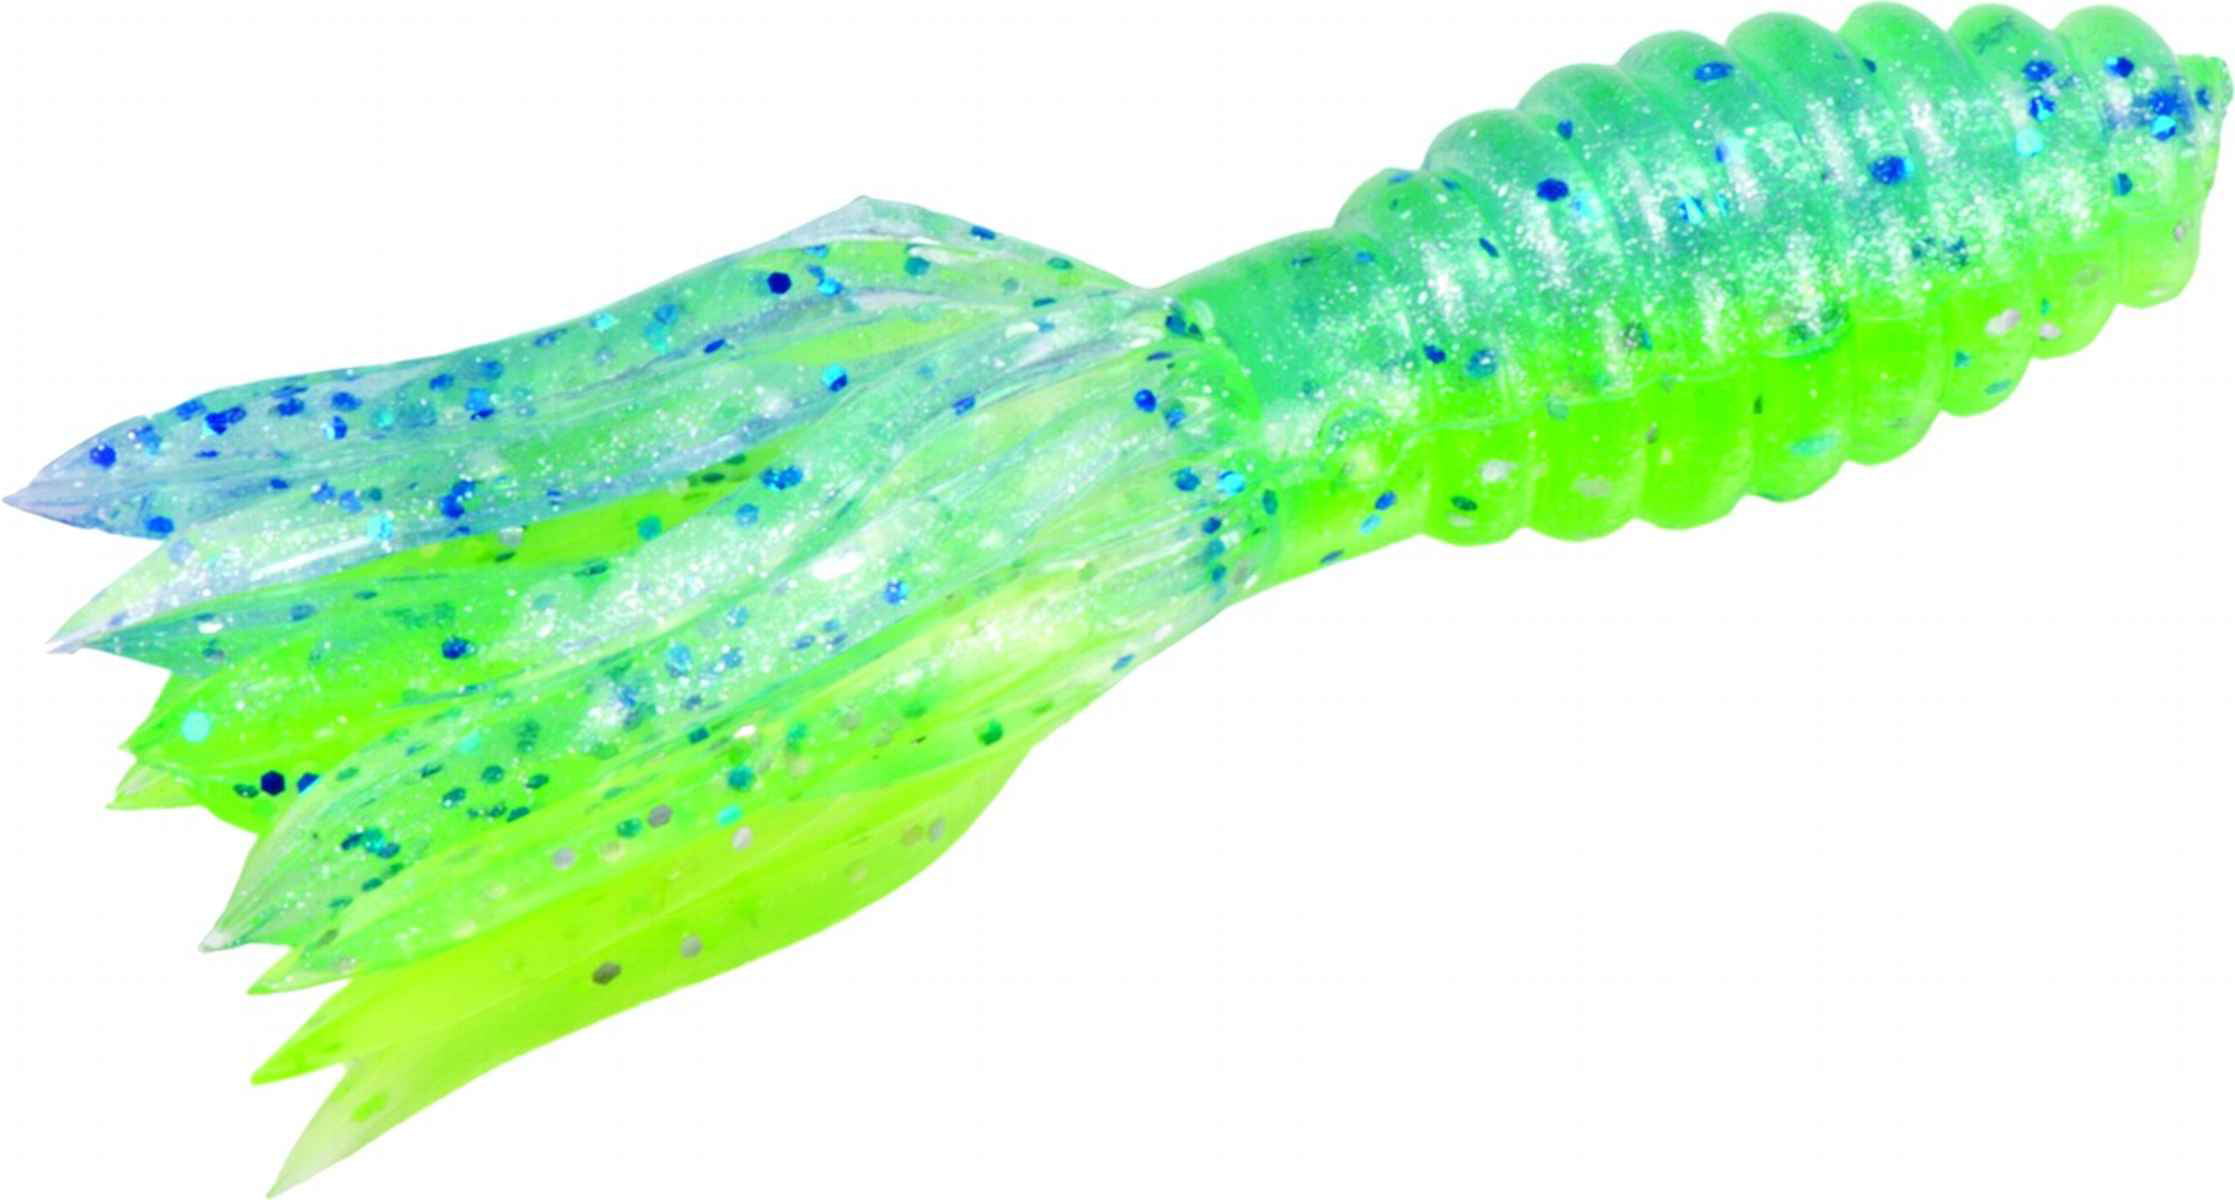 MR CRAPPIE 1.75" CRAPPIE TUBE "BLUE GRASS" 15 COUNT SET OF 2 30 TOTAL PIECES 